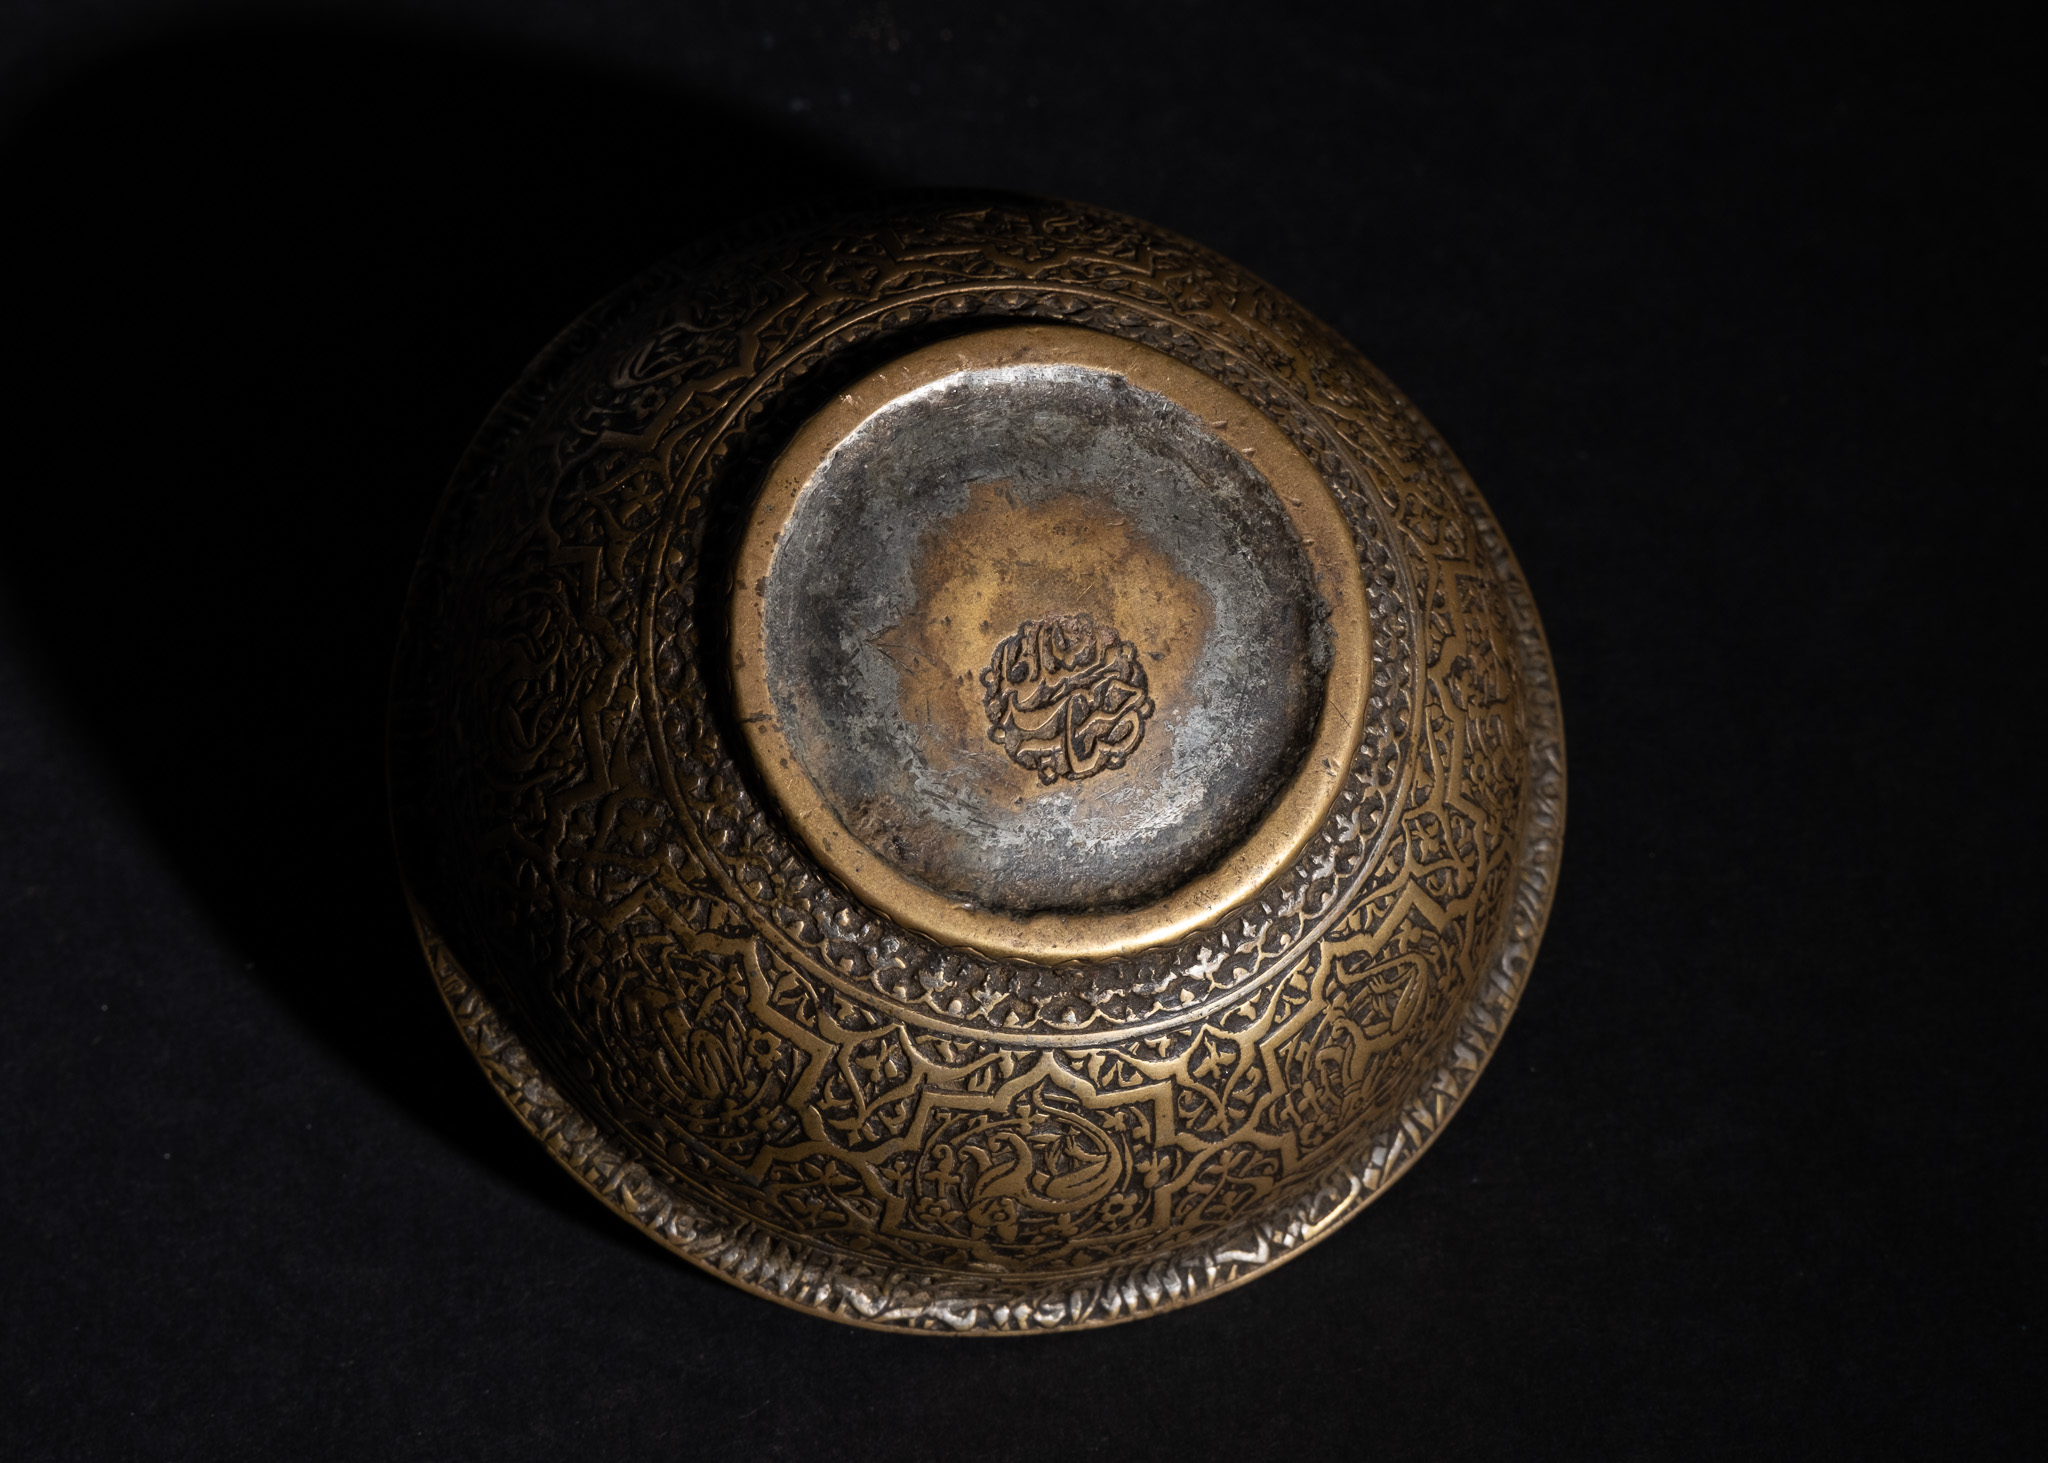 AN INSCRIBED SAFAVID TINNED COPPER BOWL, SIGNED MOHAMMAD SOLTANI, 17TH CENTURY - Image 3 of 3